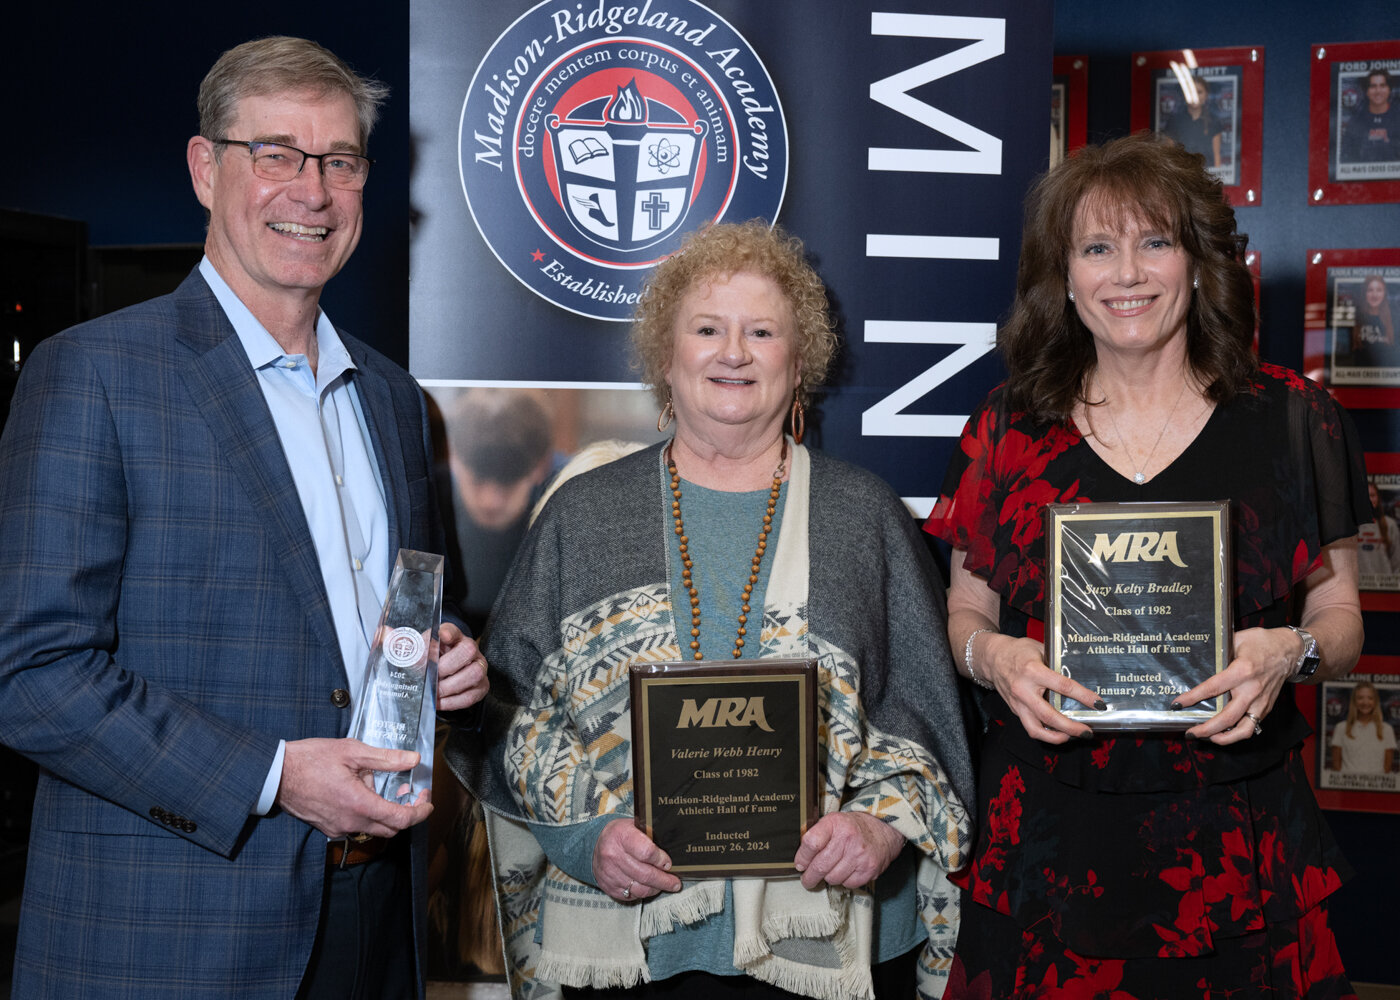 Madison-Ridgeland Academy held an induction ceremony last week for the school’s Athletic Hall of Fame. Pictured from left are Ruston Webster (Distinguished Alumnus of the Year), Valerie Webb Henry (inductee) and Suzy Kelty Bradley (inductee). The late Sam Rea was also inducted into the Hall of Fame.